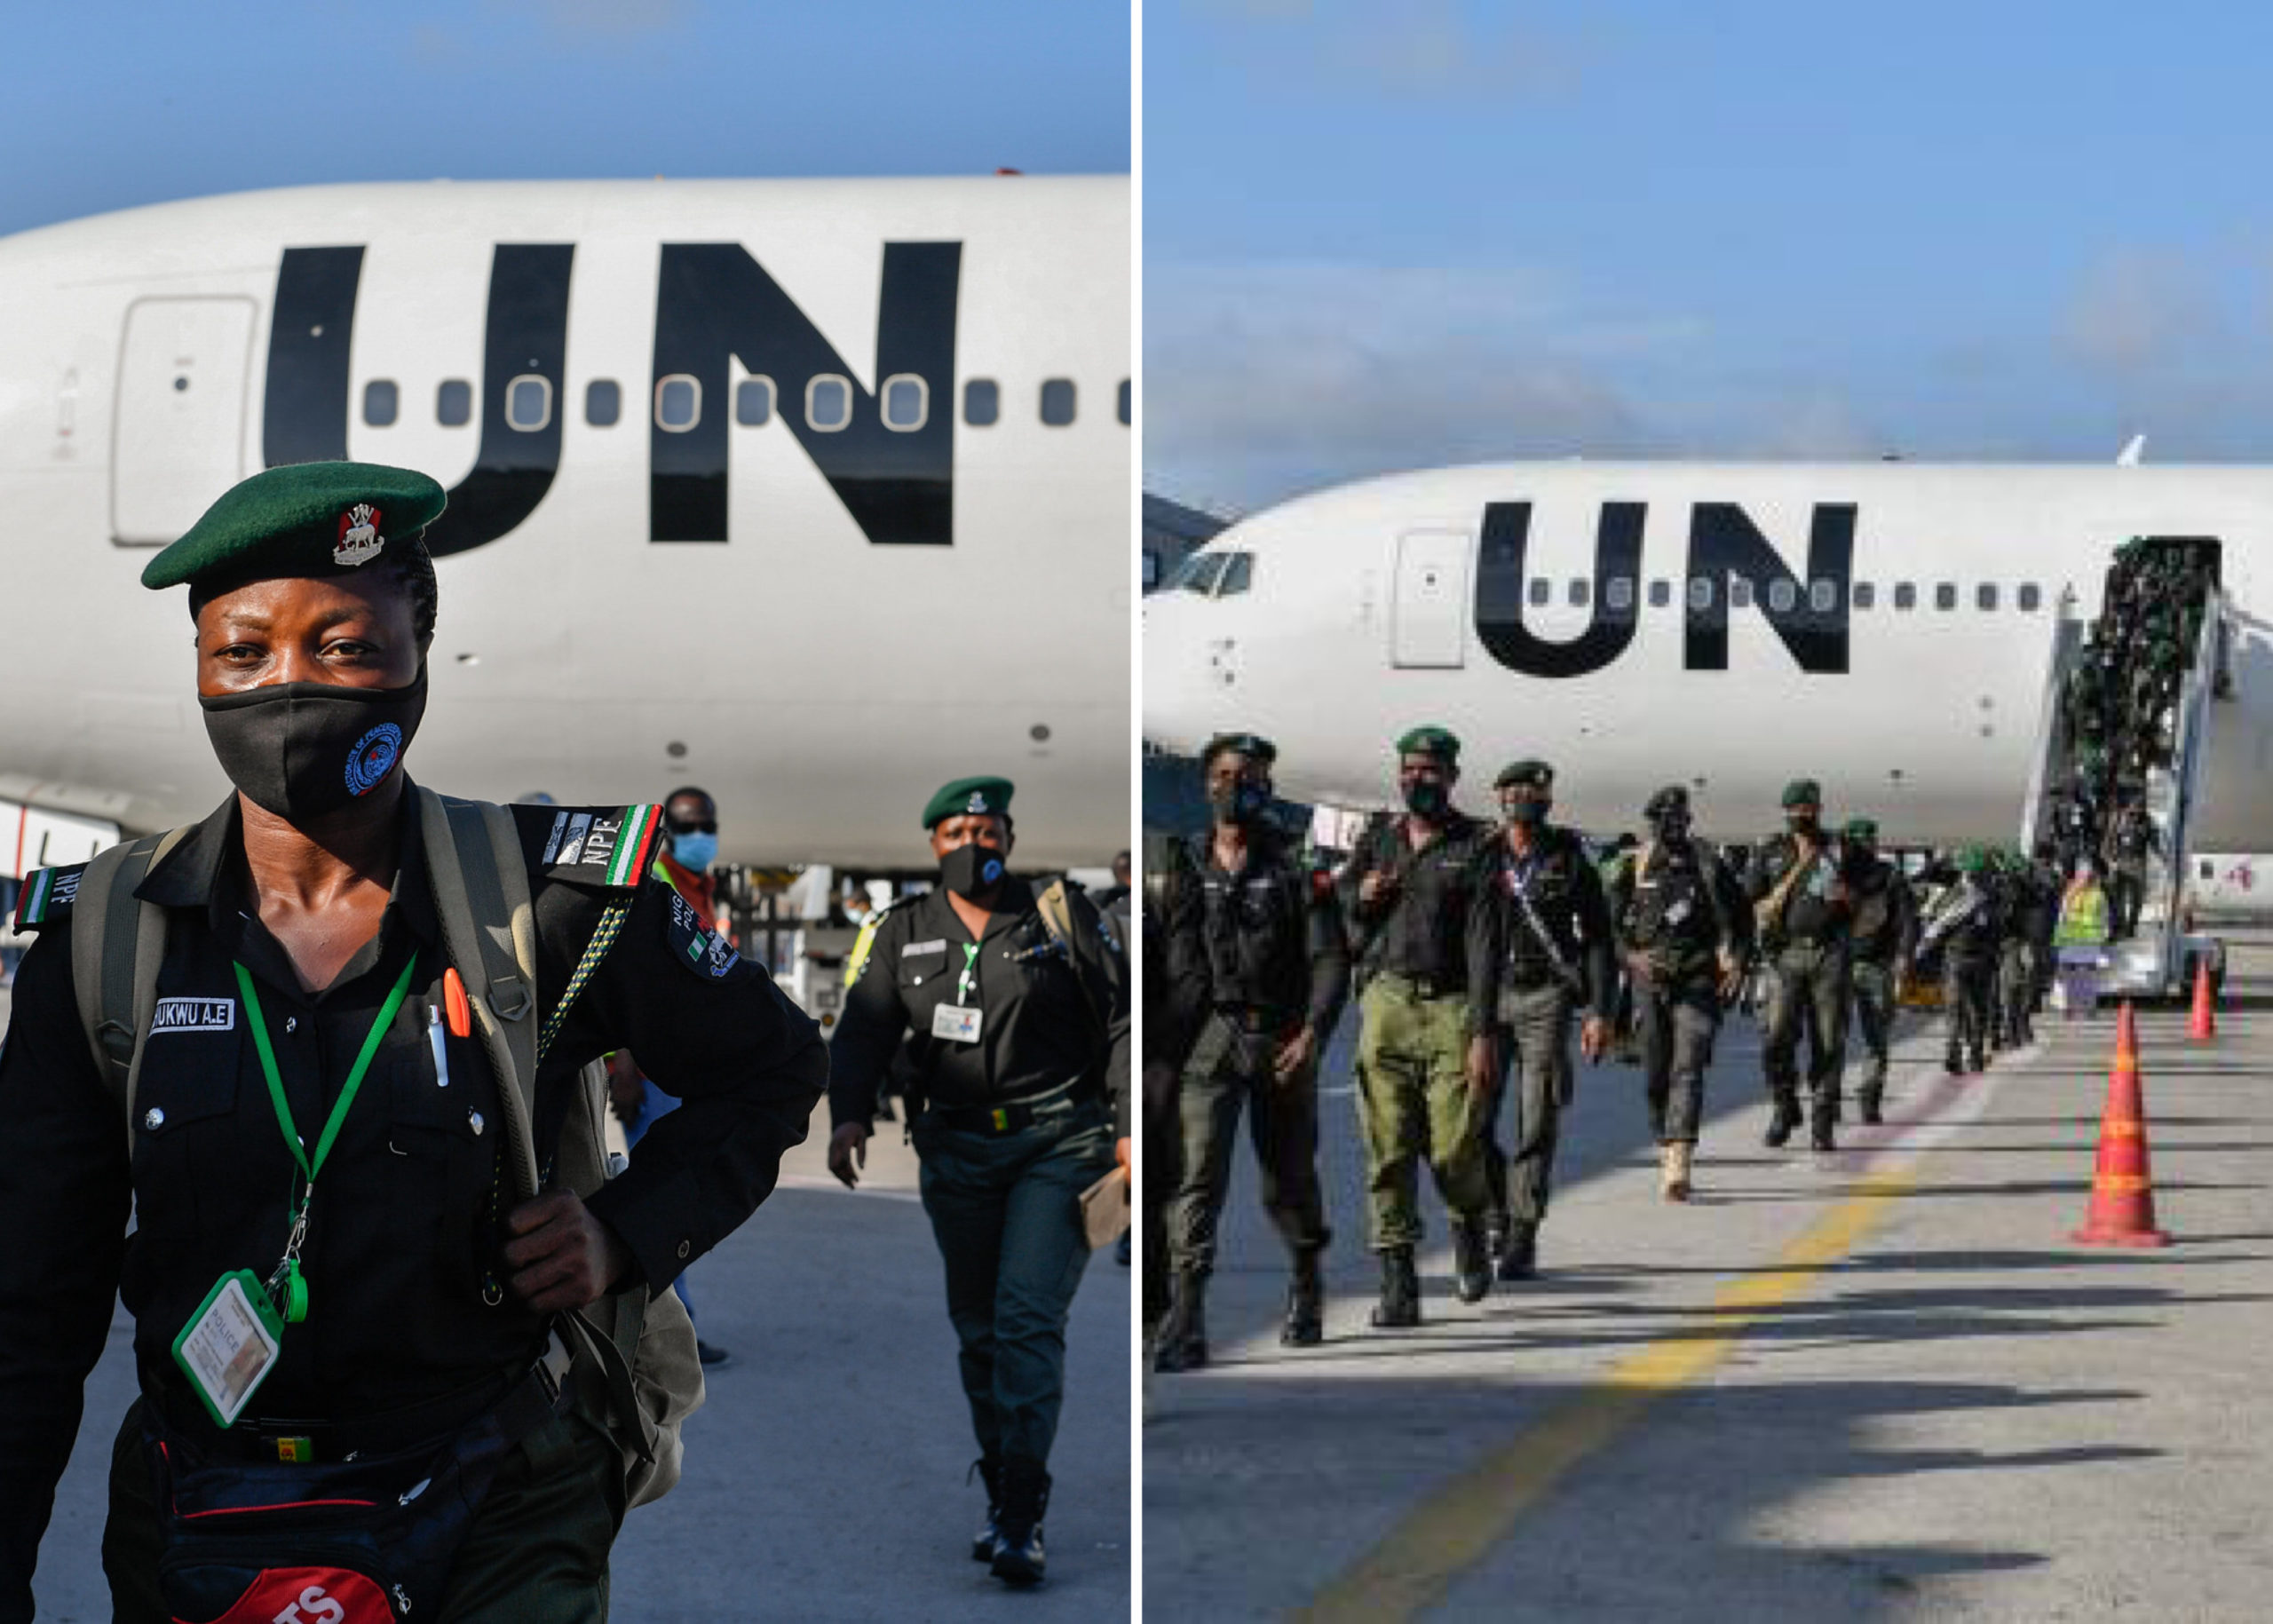 144 Nigerian Policemen Deployed To Somalia To Boost Security, Train Police Force